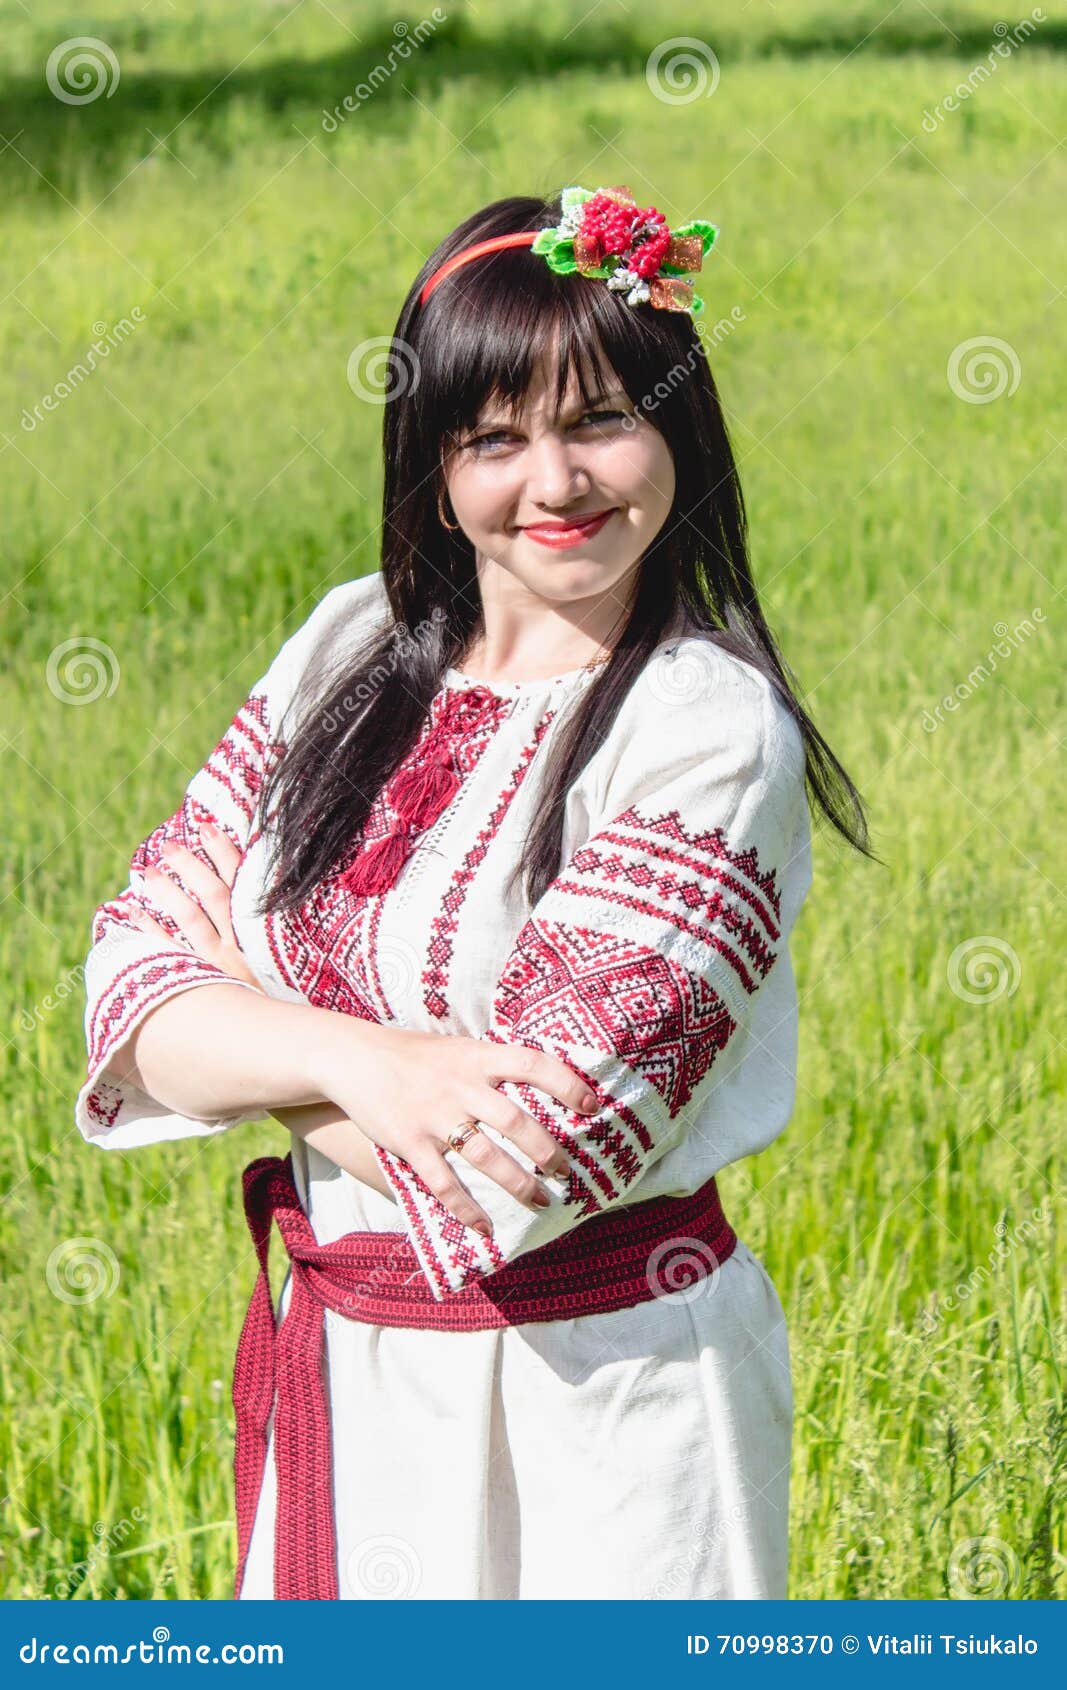 Ukrainian Girl in National Clothes Stock Photo - Image of makeup ...